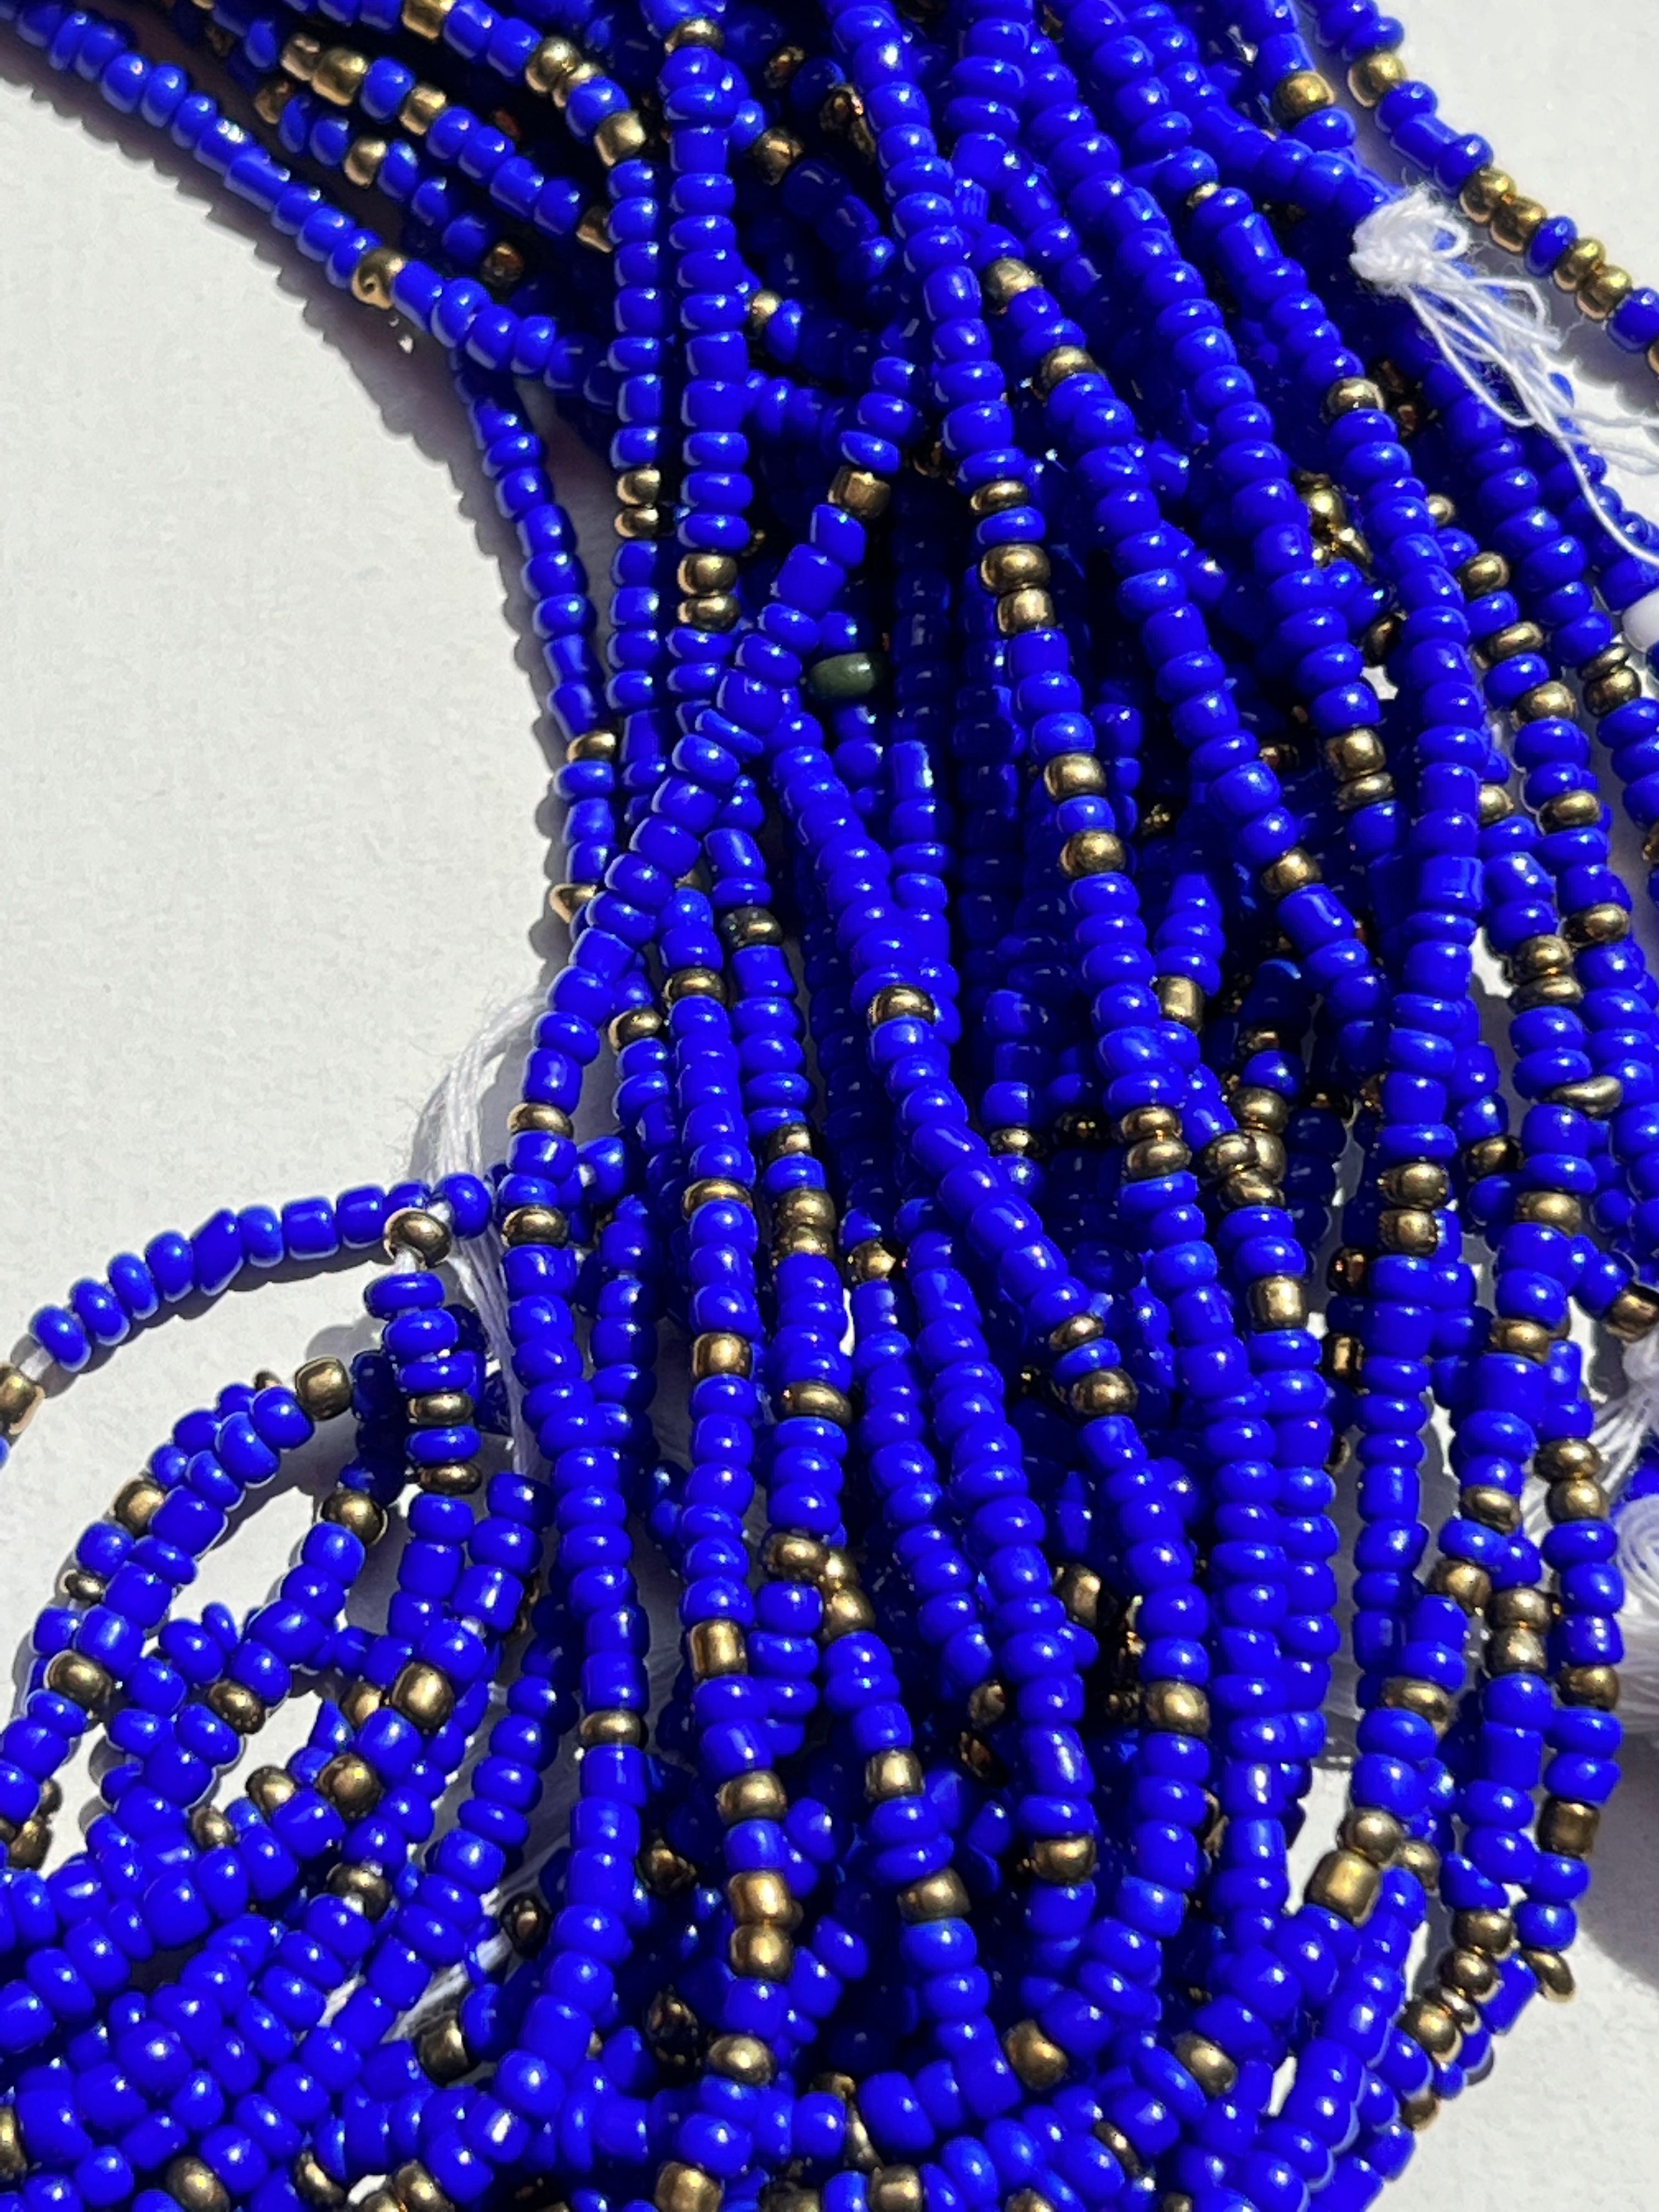 Blue and Gold waist beads for weight loss